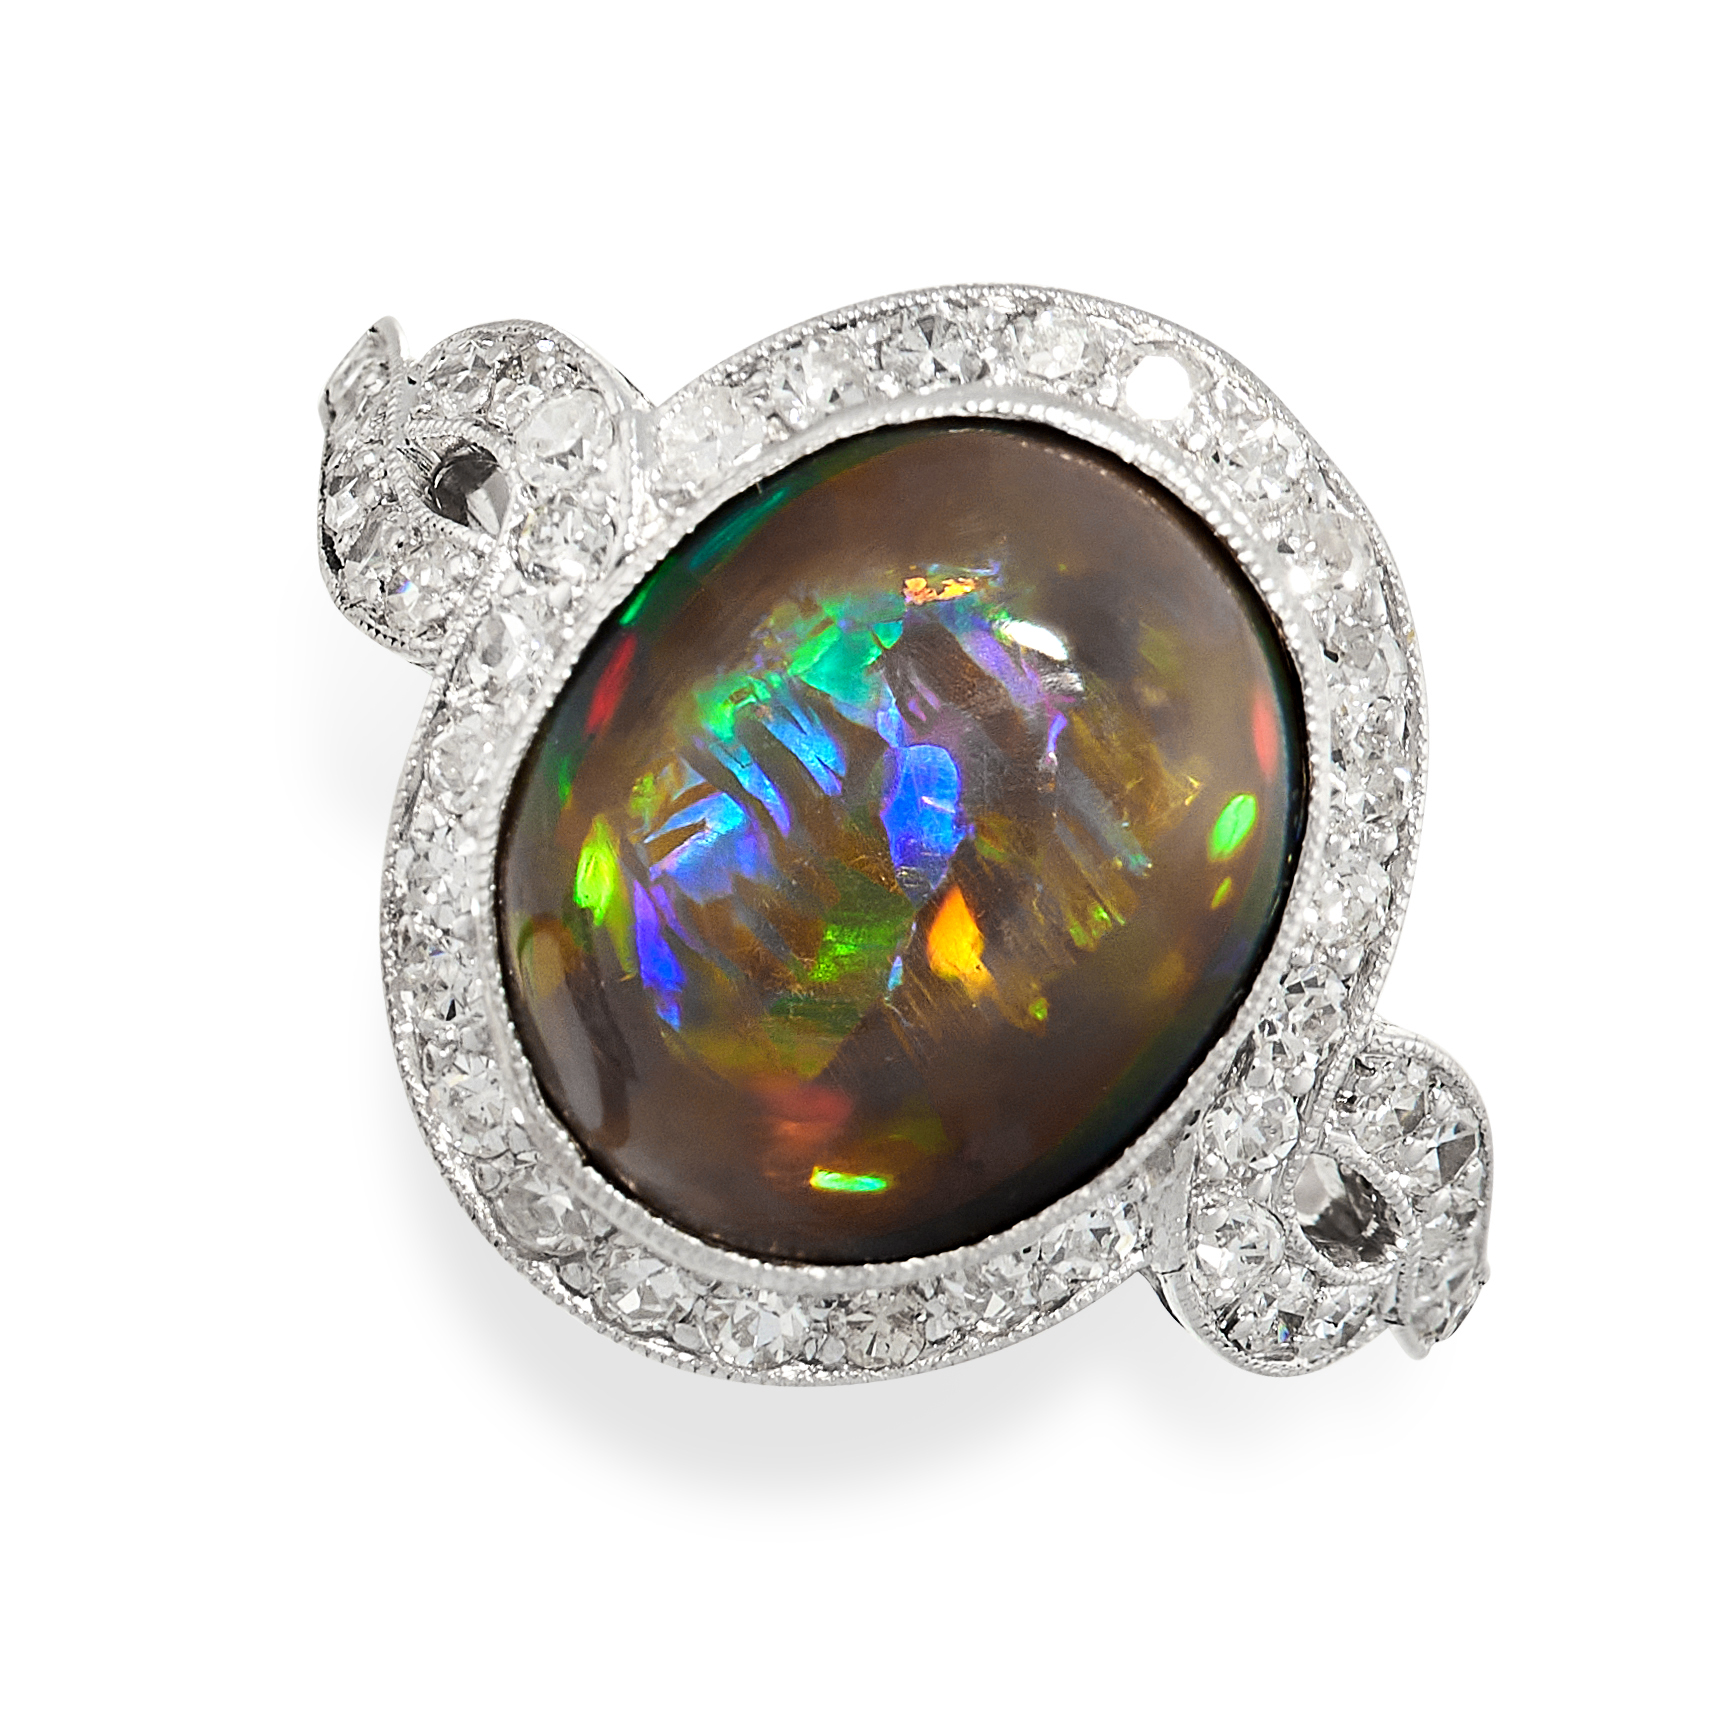 A FINE BLACK OPAL AND DIAMOND RING set with an oval cabochon black opal of 4.22 carats, within an